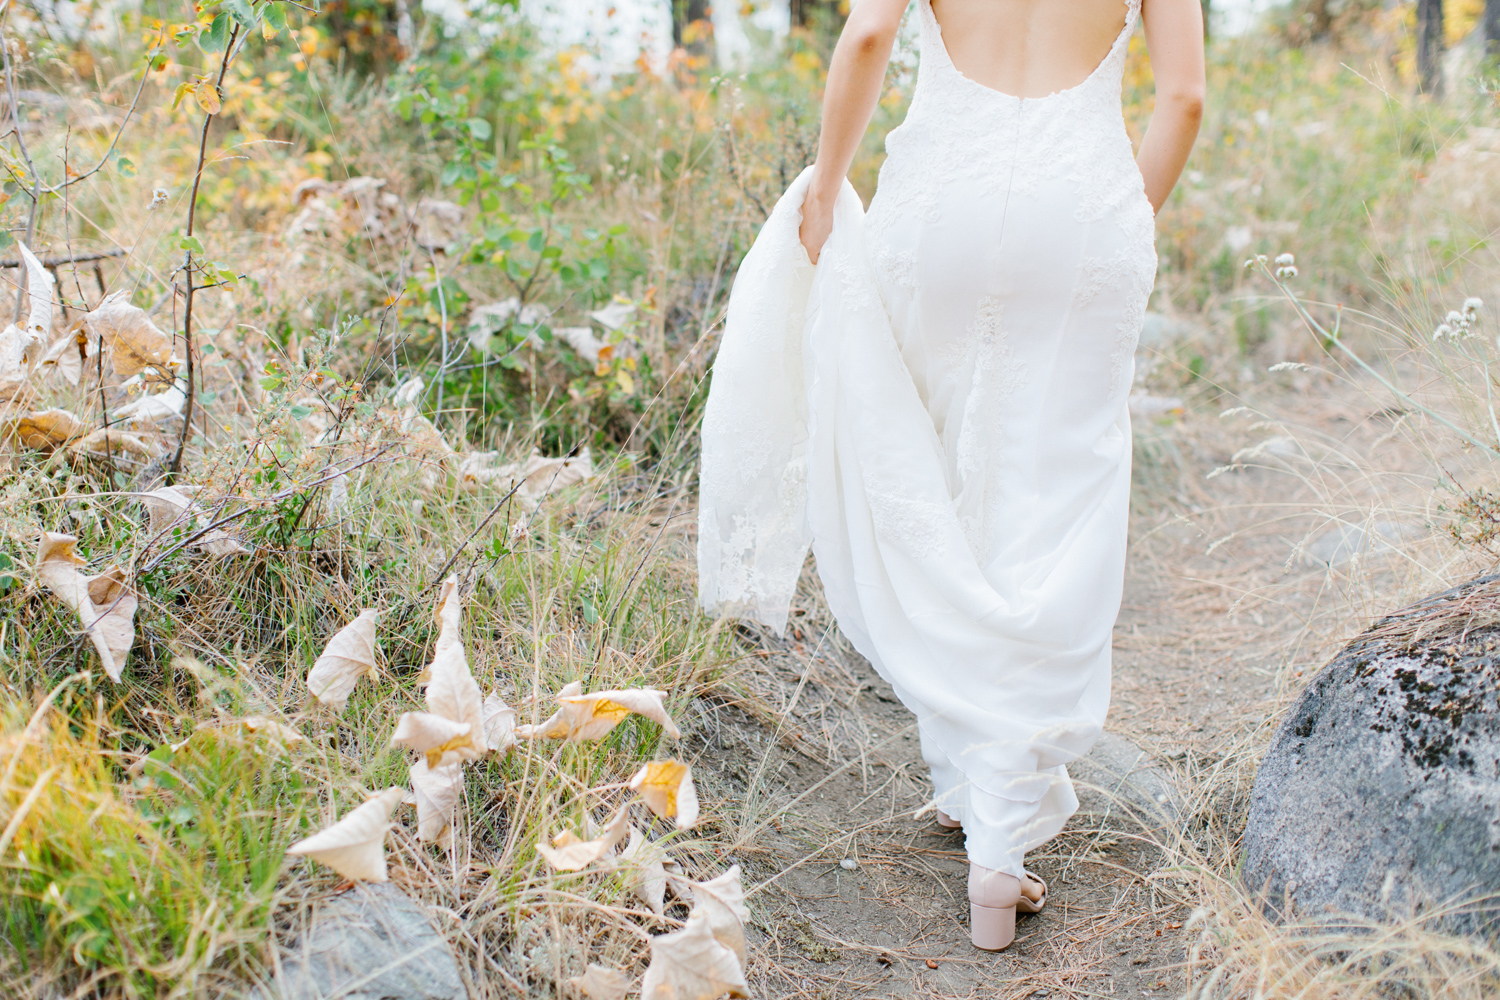 Grey and White Wedding in the Mountains of Leavenworth, Washington | Sleeping Lady | Classic and Timeless Wedding | VSCO | Bride with Bridesmaids | Grey Bridesmaids Dresses.jpg-2304.jpg